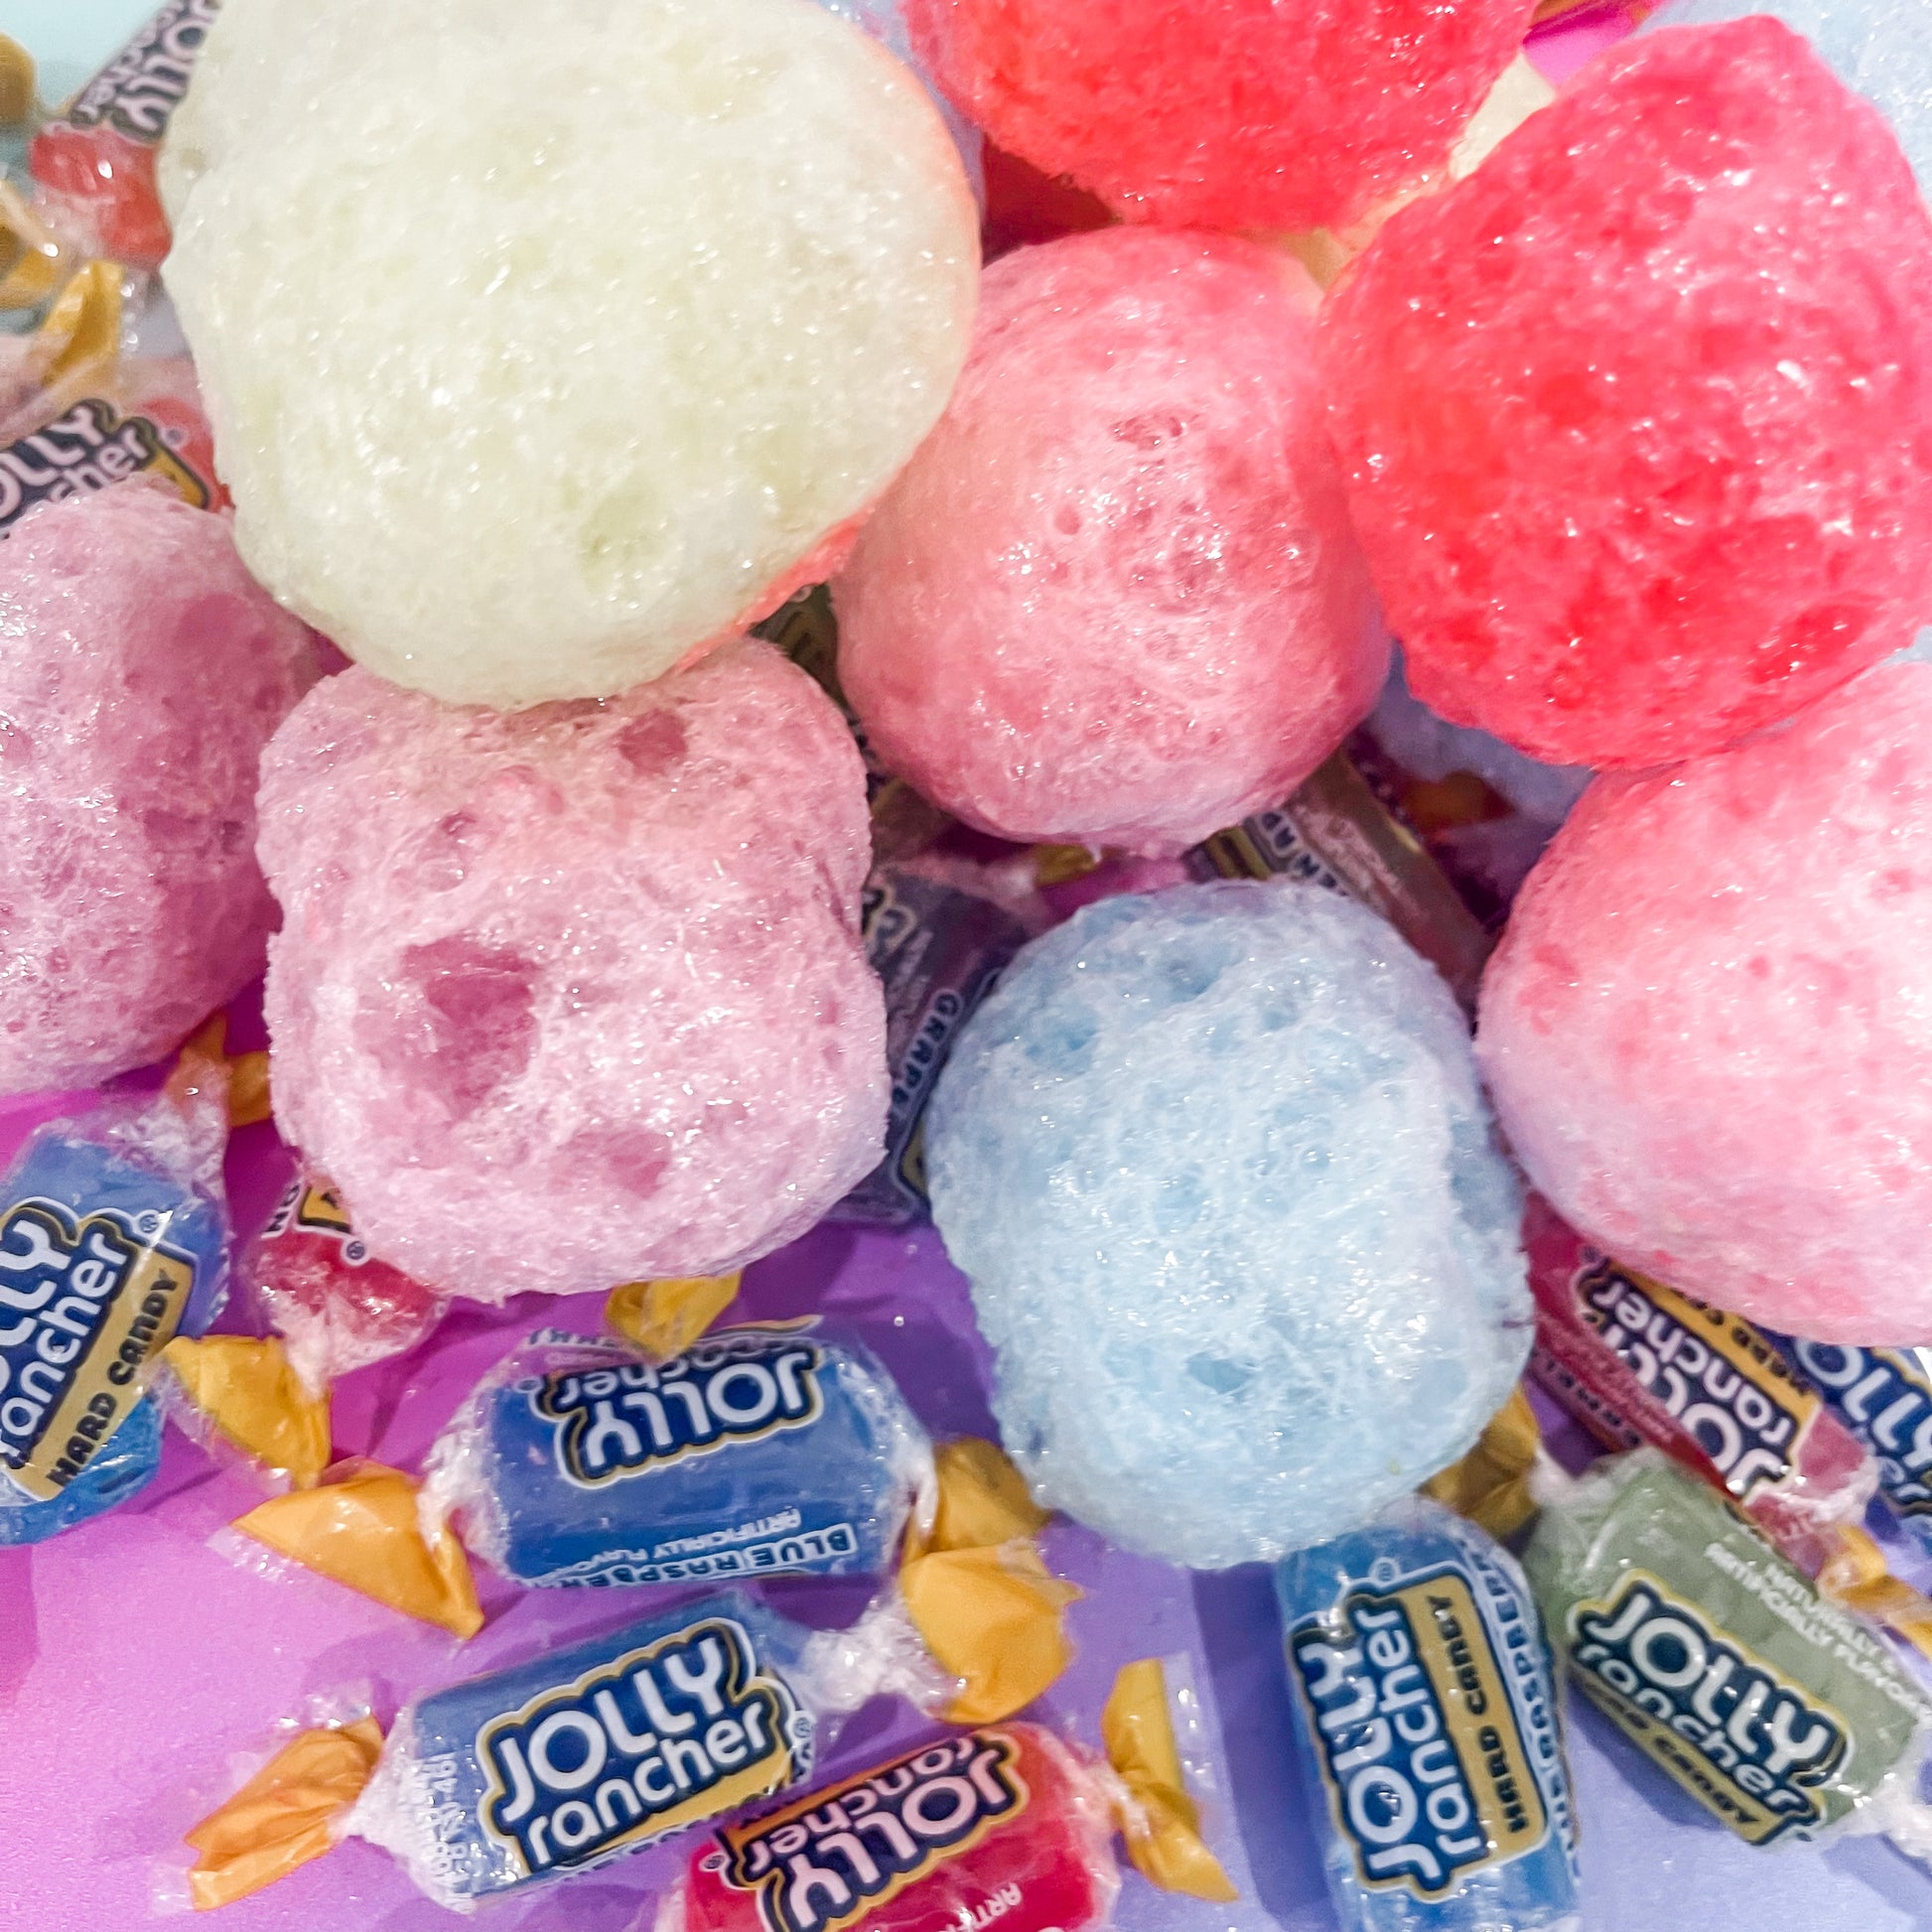 Freeze Dried Jolly Rancher Candy